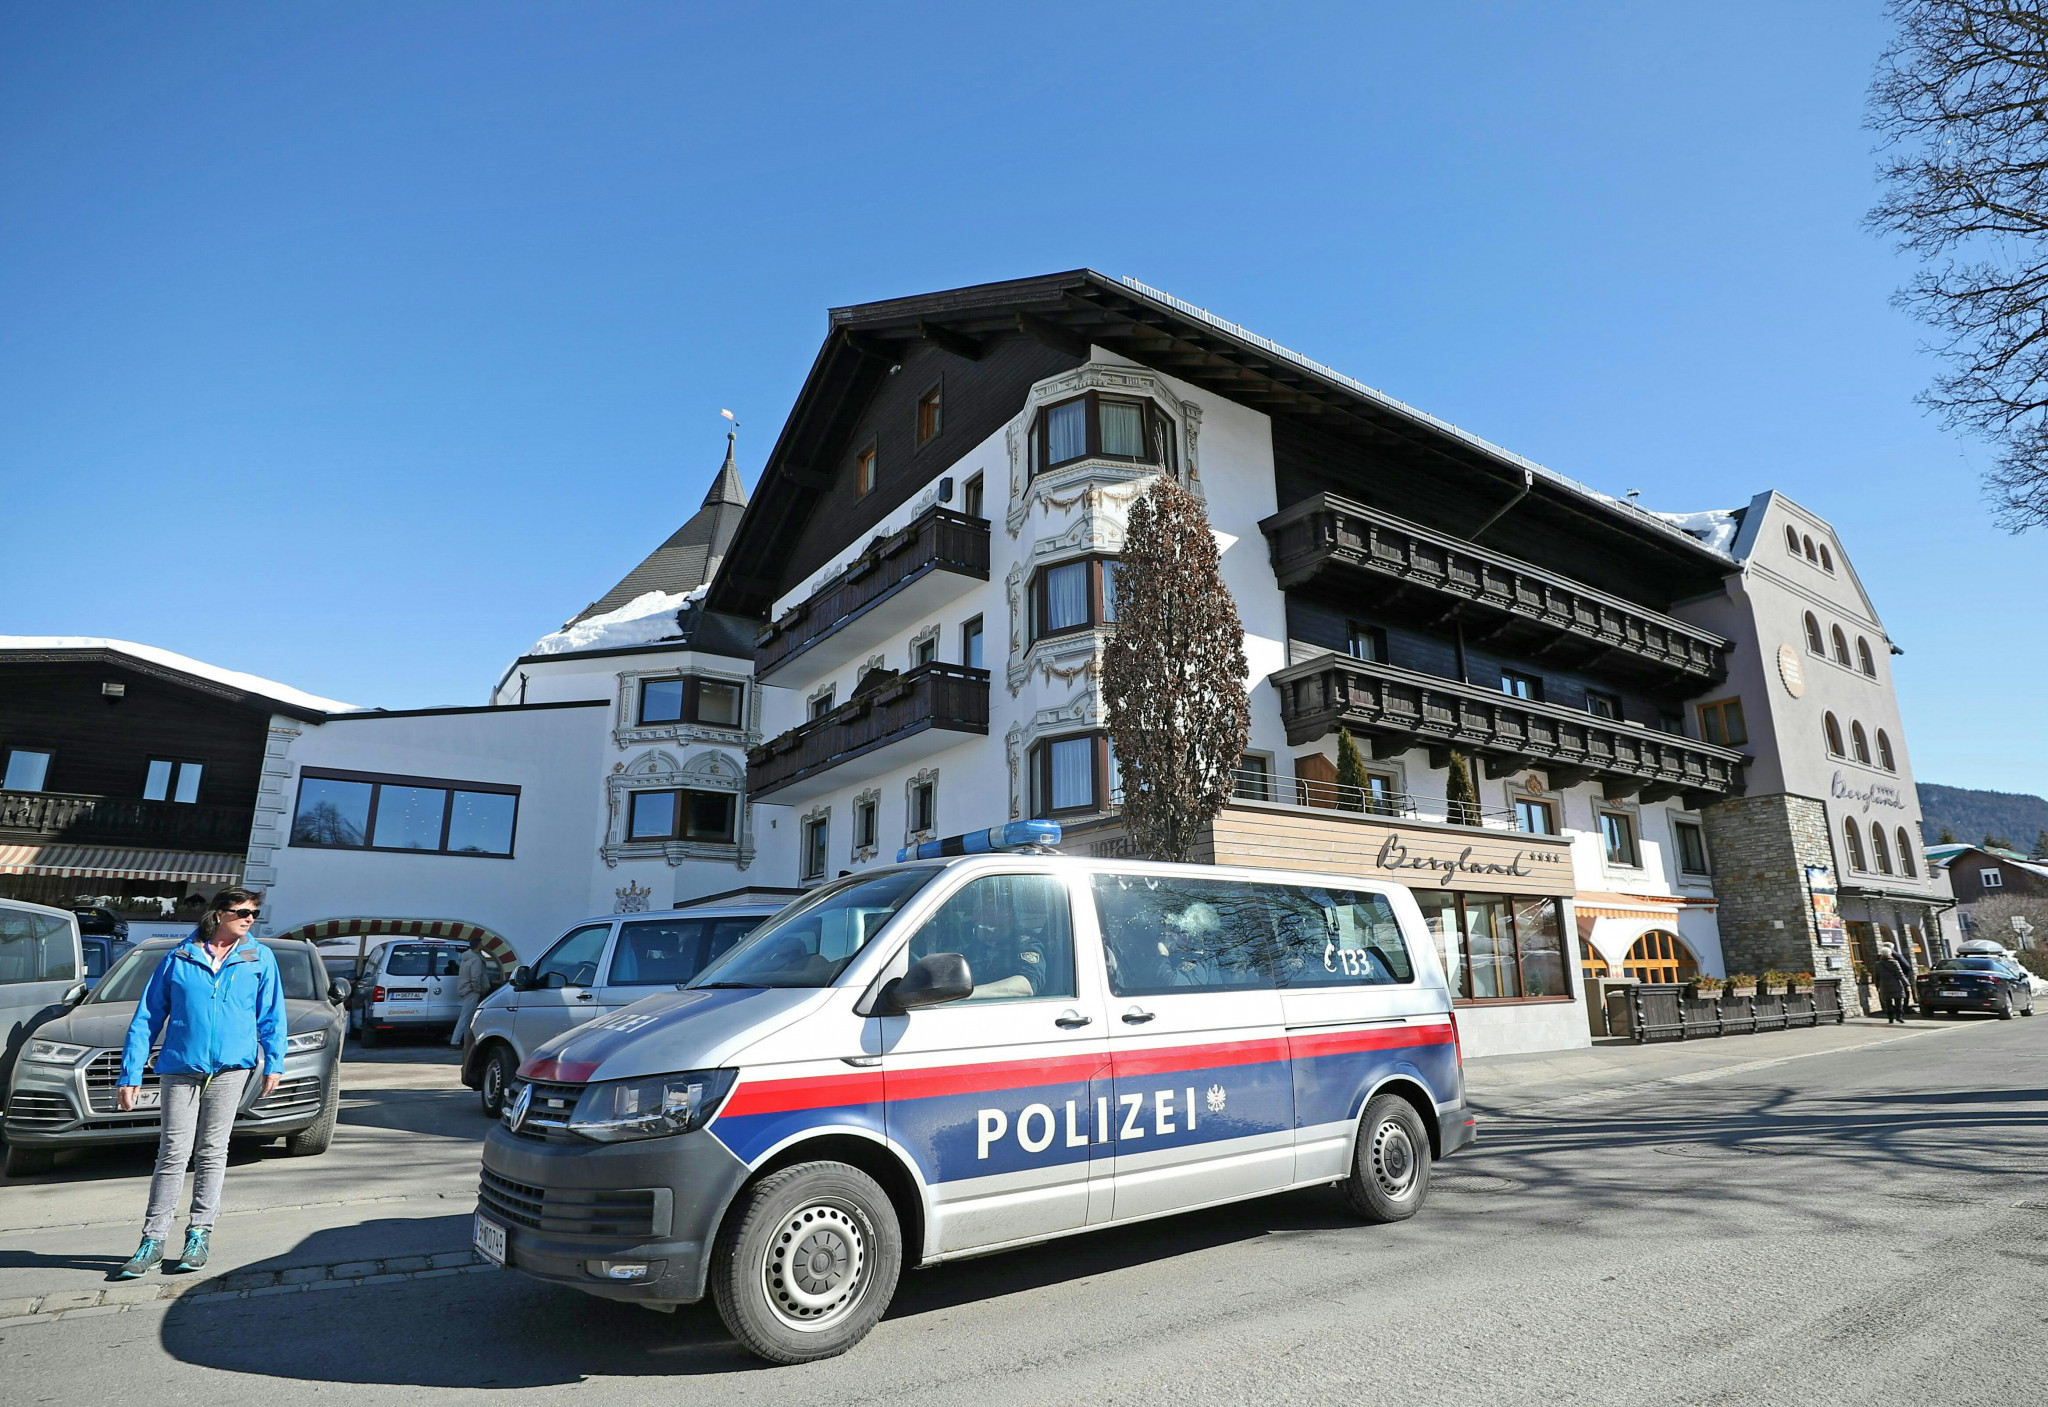 The police raid in Seefeld allegedly uncovered an international doping ring ©Getty Images